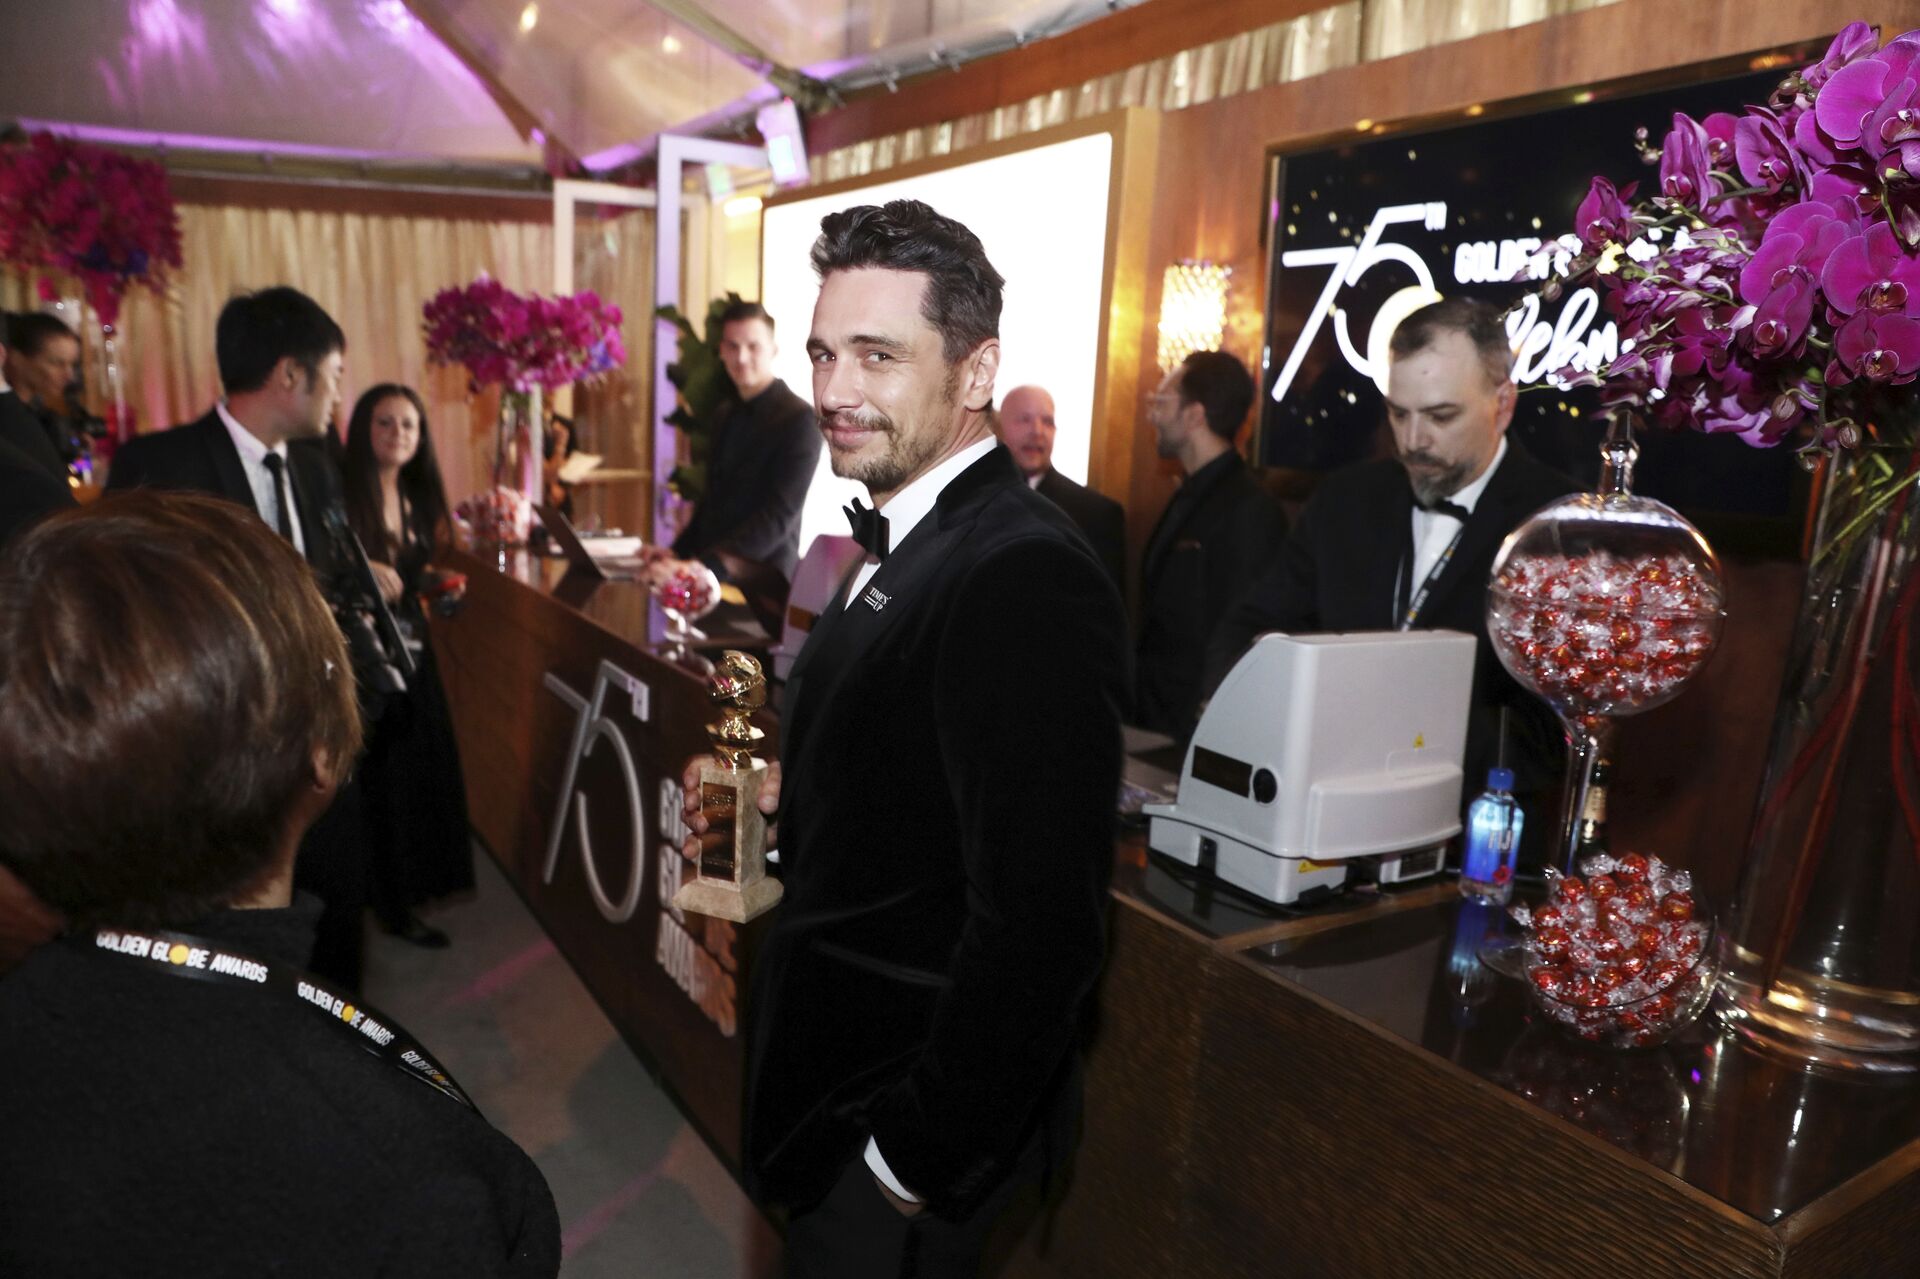 James Franco is seen at the Golden Globes Official After Party sponsored by Lindt Chocolate on Sunday, Jan. 7, 2018 in Beverly Hills, Calif - Sputnik International, 1920, 25.12.2021